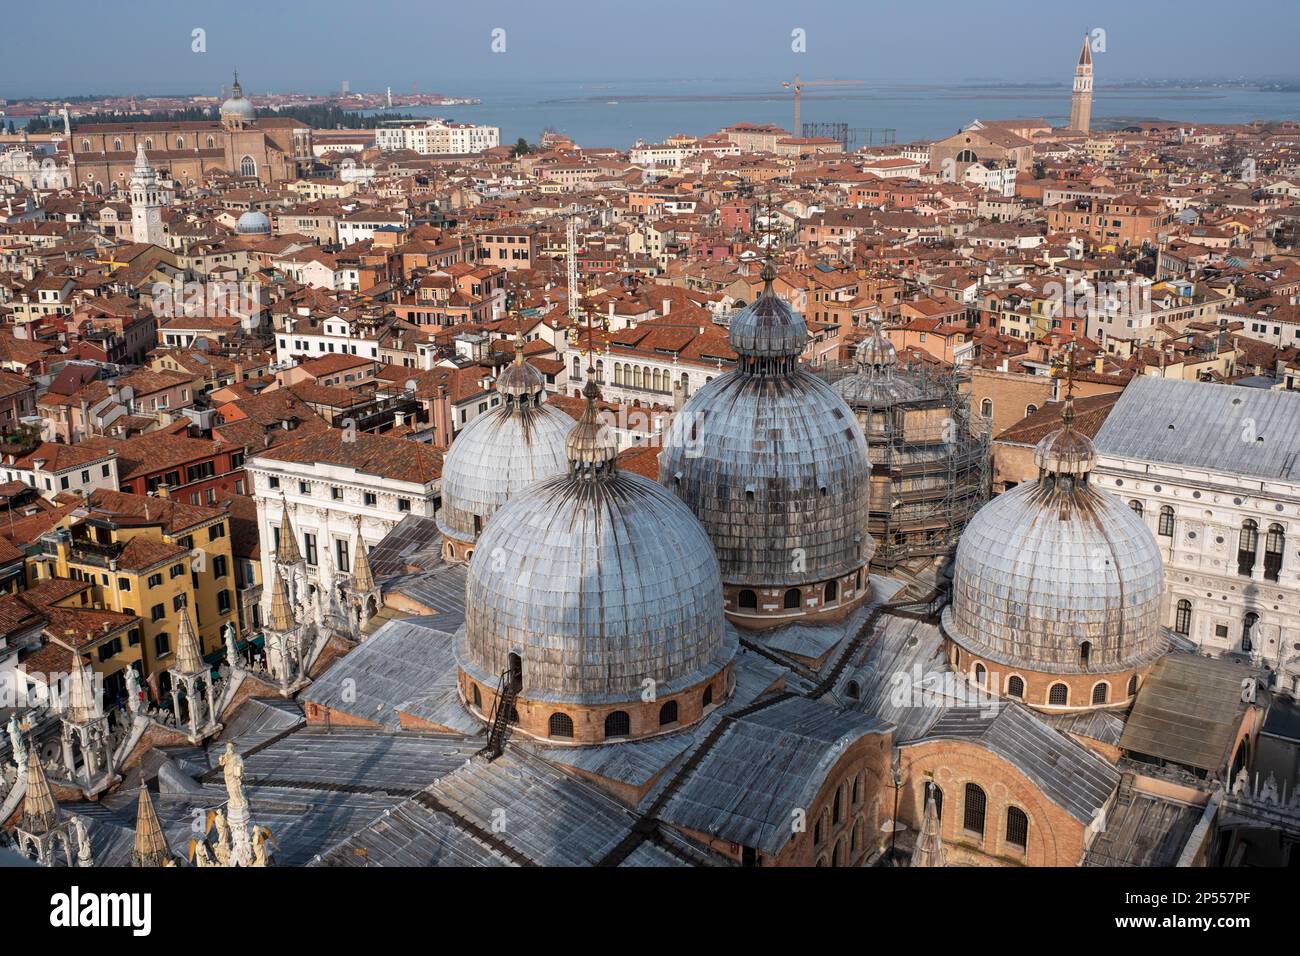 View over Venice from the San Marco Campanile, Venice, Italy Stock Photo